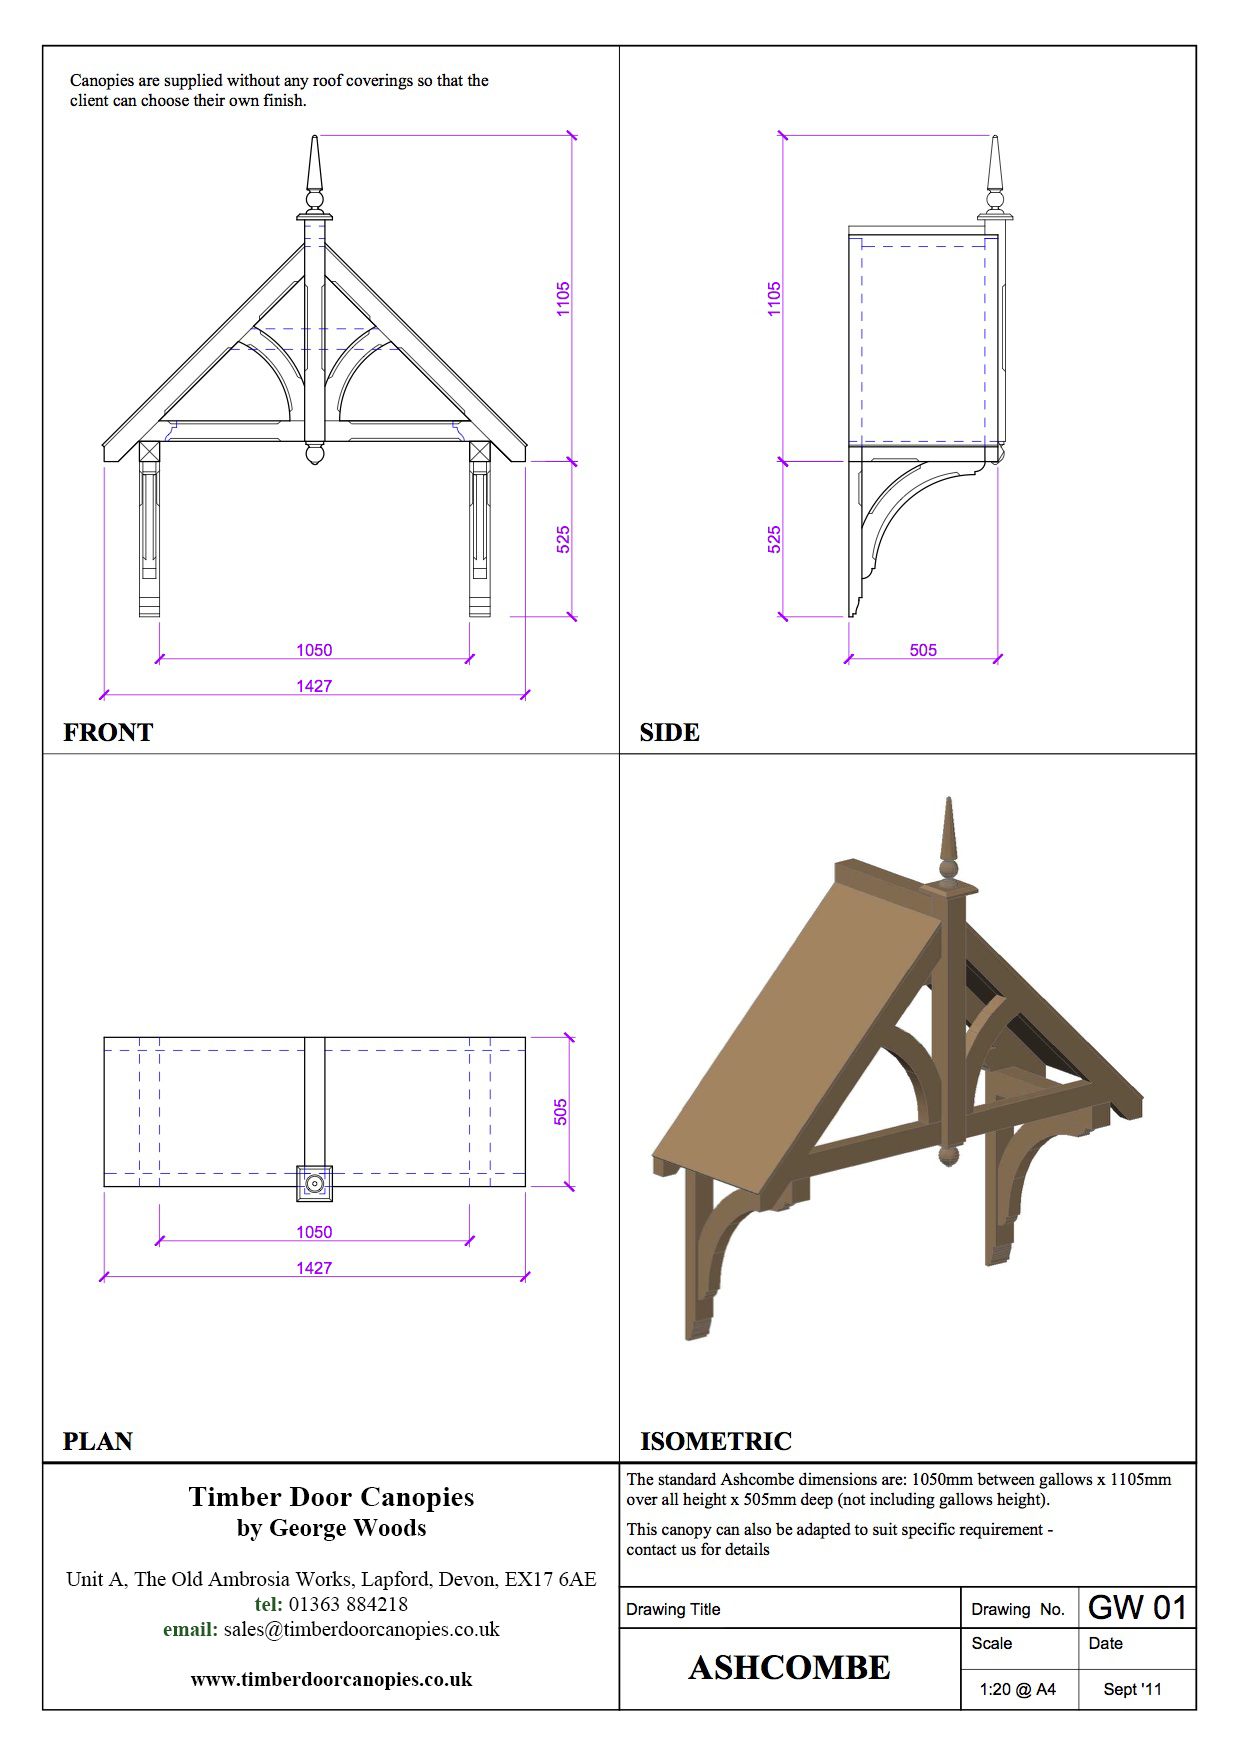 Branscombe canopy CAD Drawings